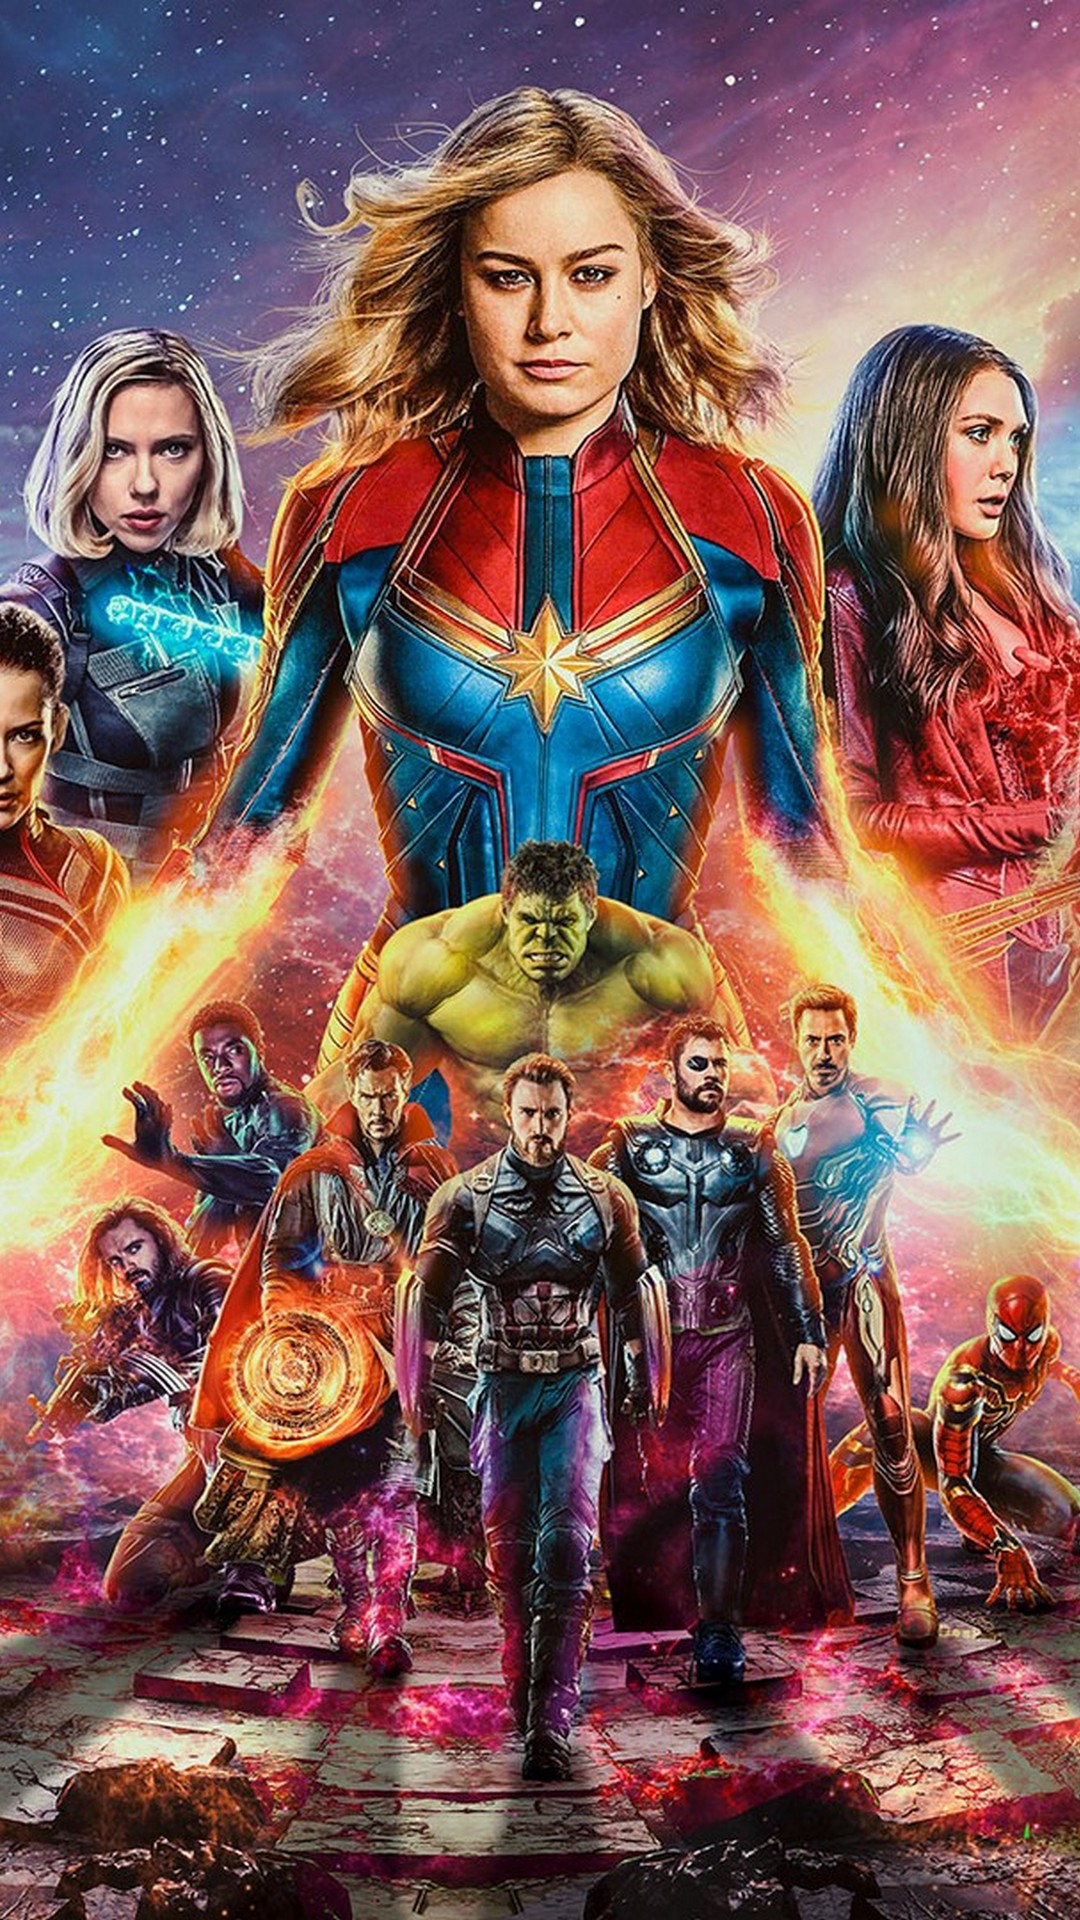 Avengers Endgame iPhone Wallpaper with high-resolution 1080x1920 pixel. You can use this wallpaper for your iPhone 5, 6, 7, 8, X, XS, XR backgrounds, Mobile Screensaver, or iPad Lock Screen